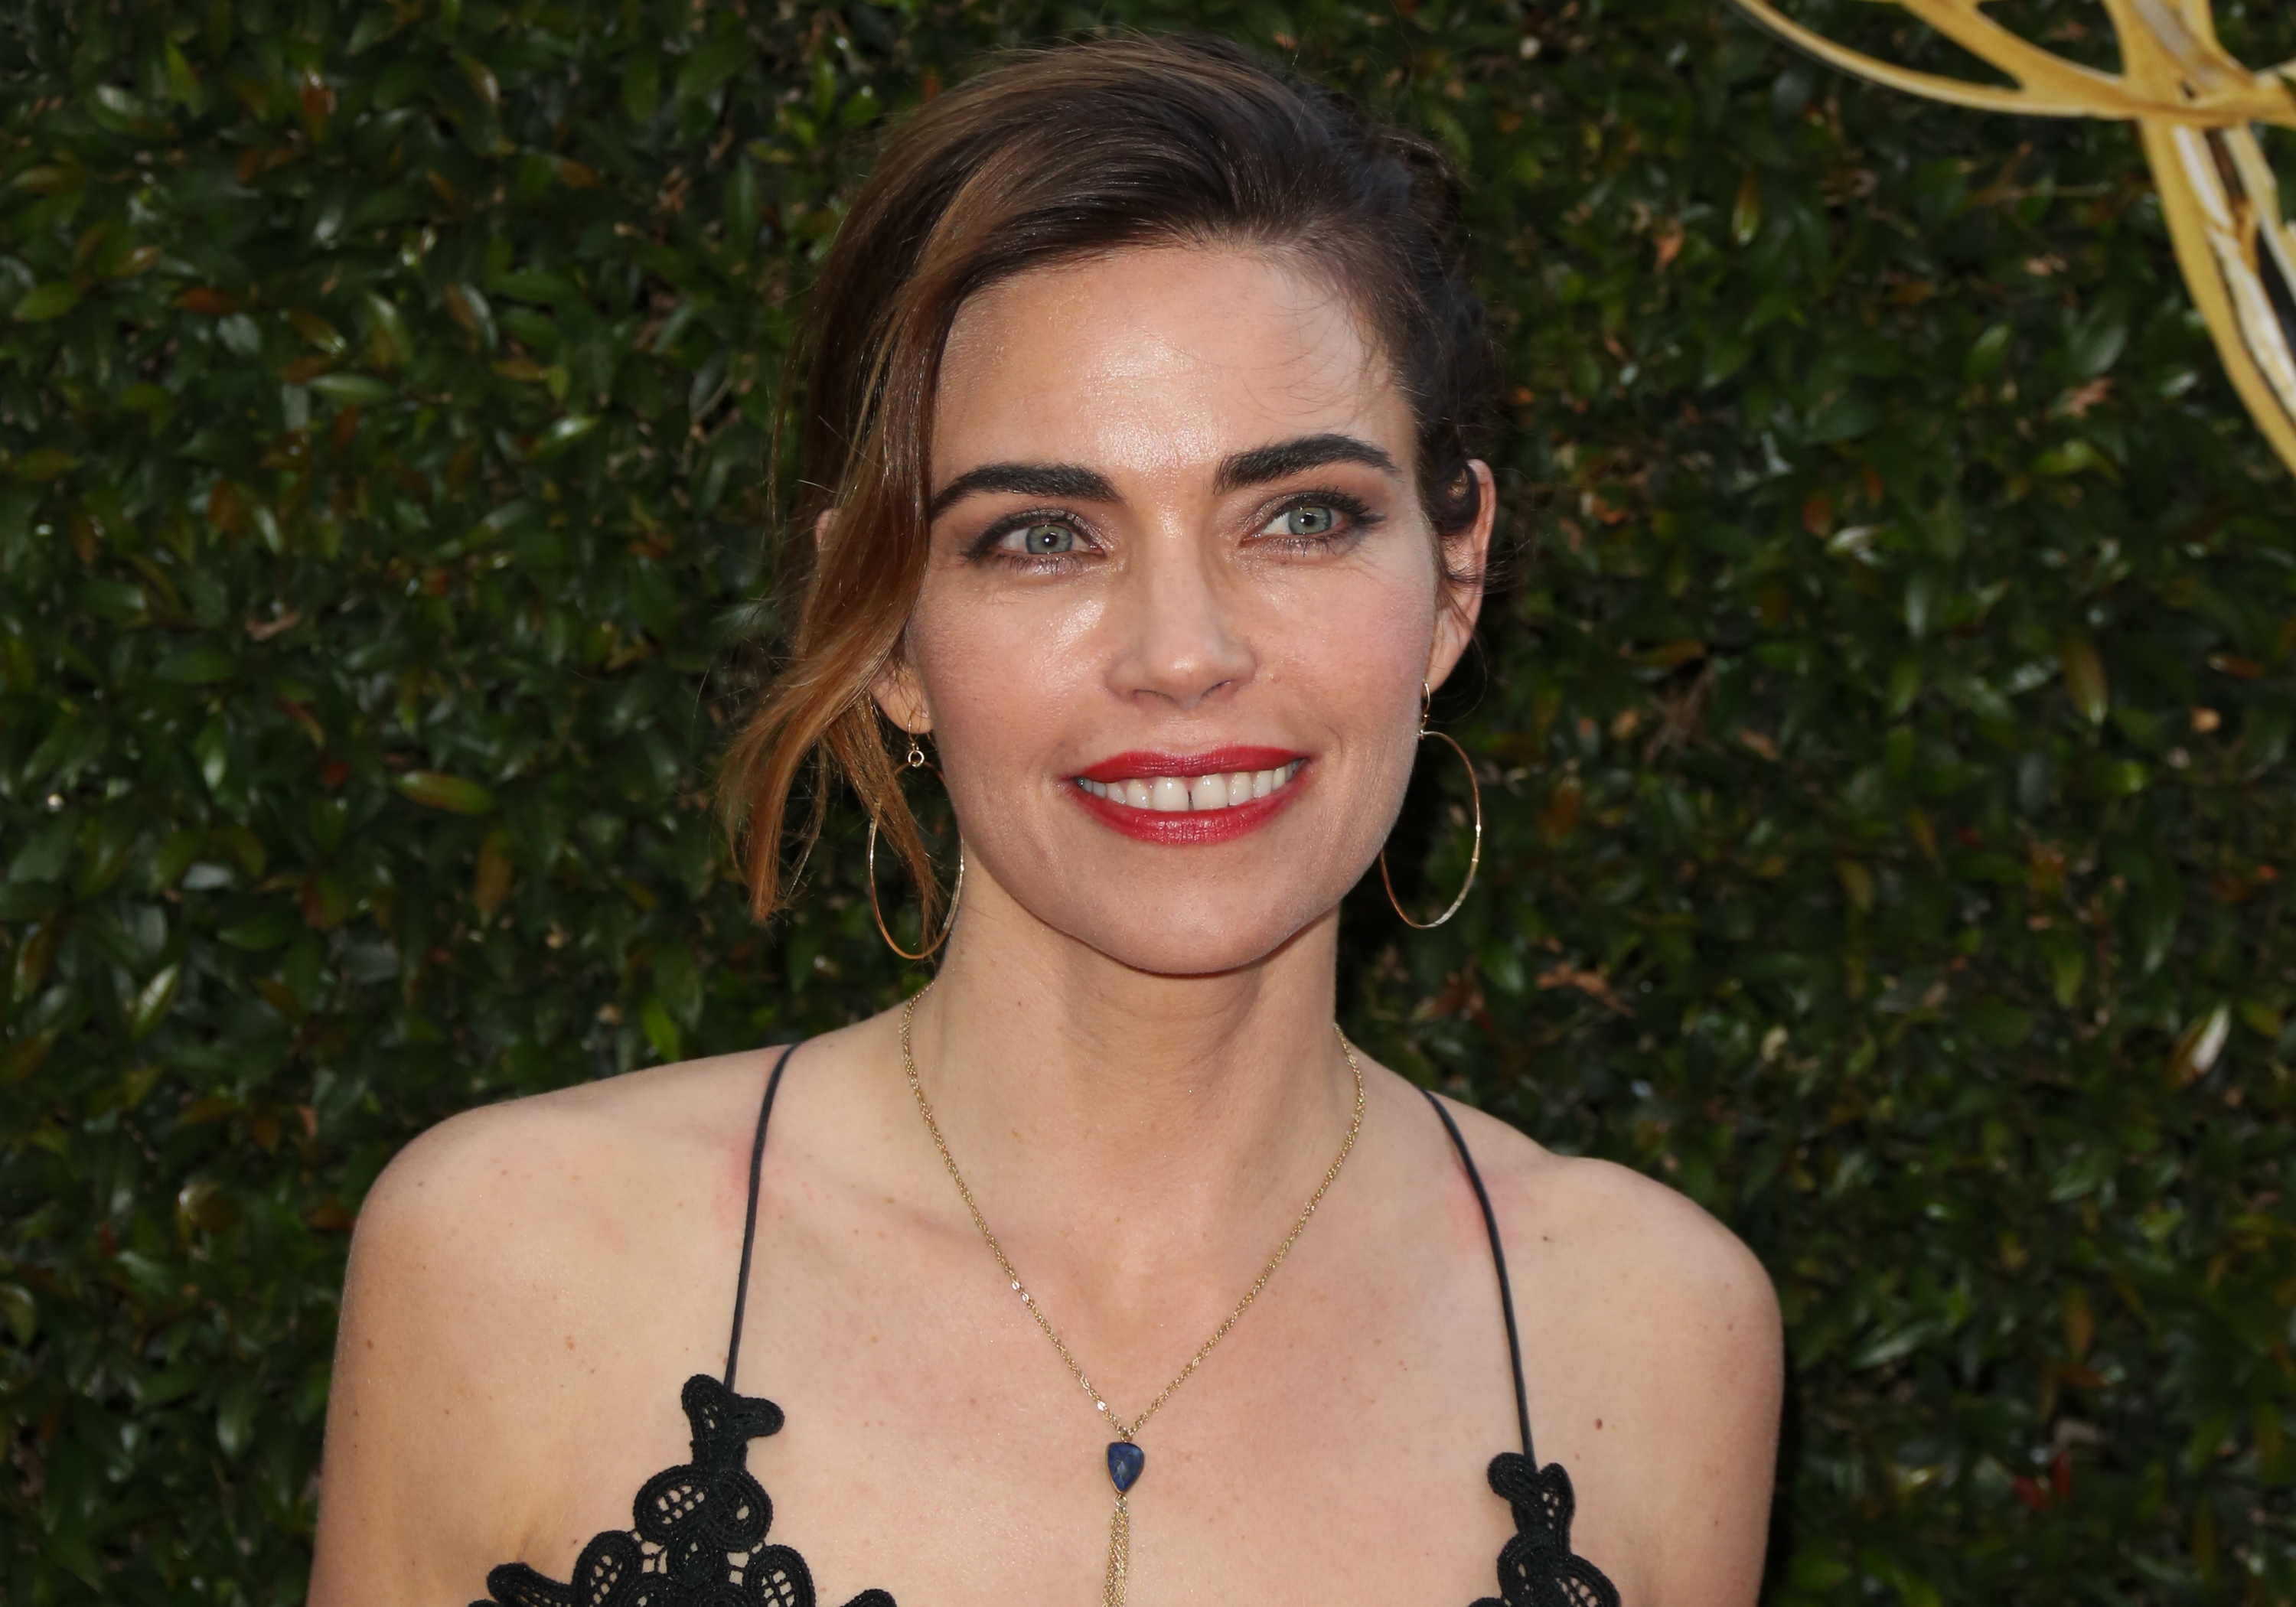 'The Young and the Restless' actor Amelia Heinle wearing a black dress and standing in front of a green hedge.